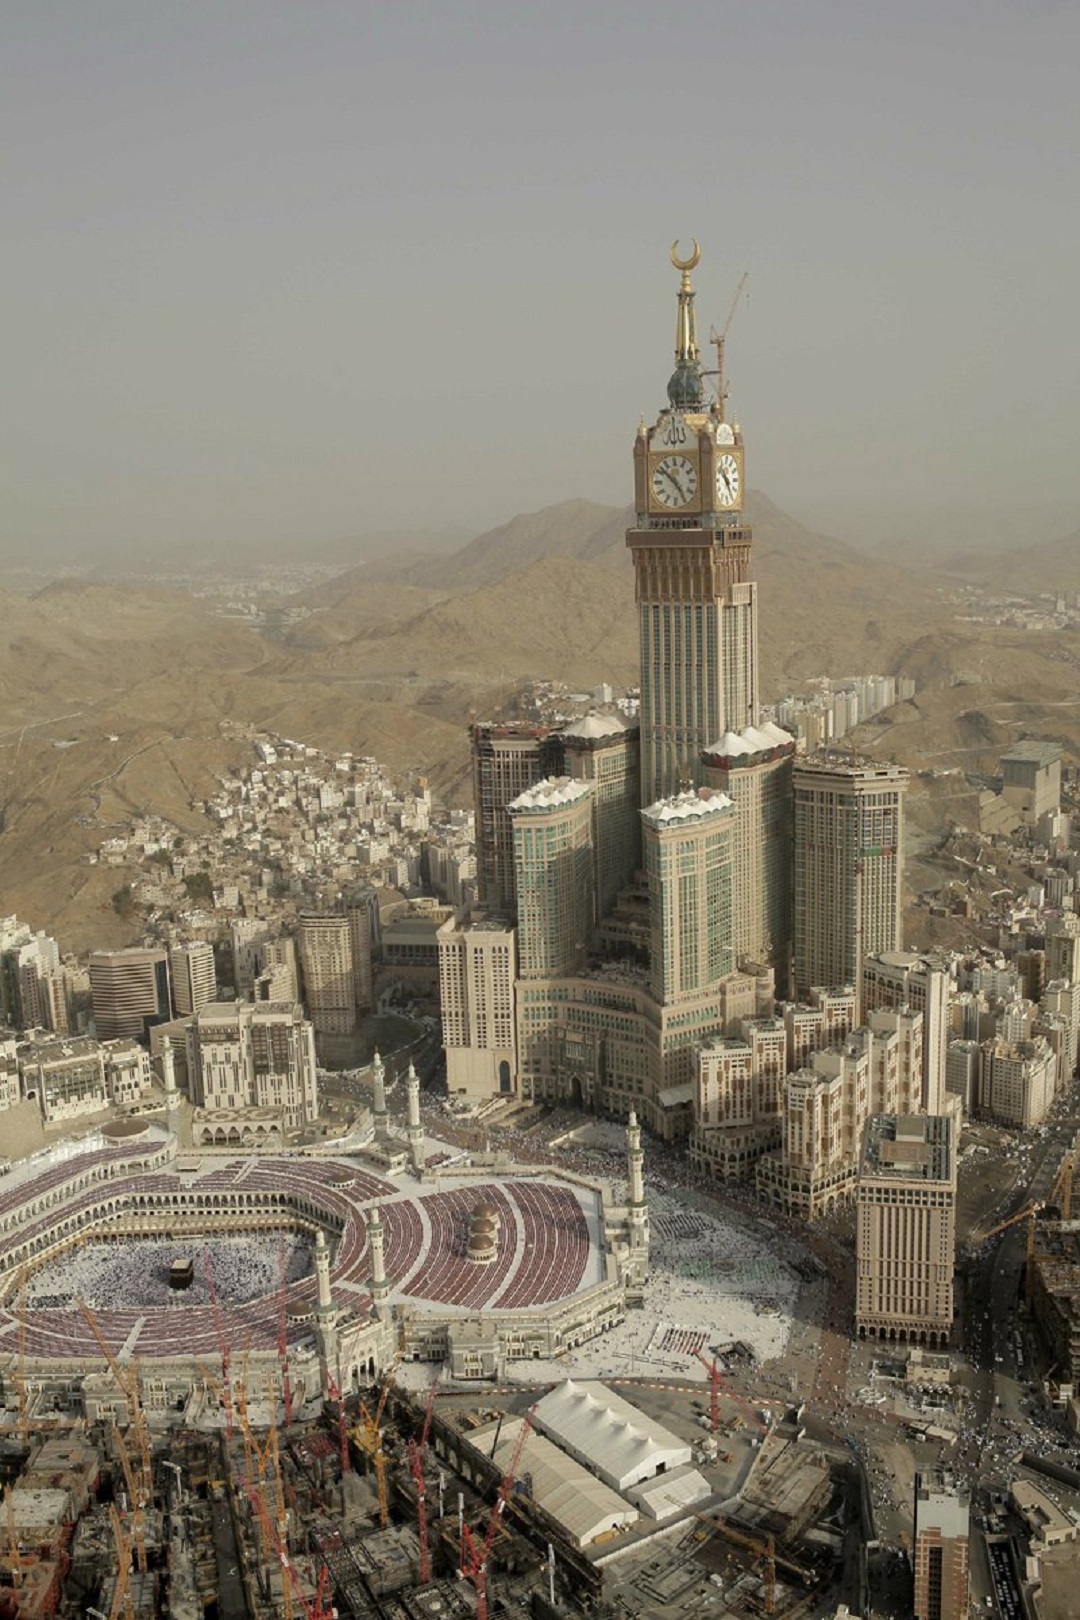 Mecca Cityscape, Including The Royal Tower Hotel. The 3rd Tallest Building In The World